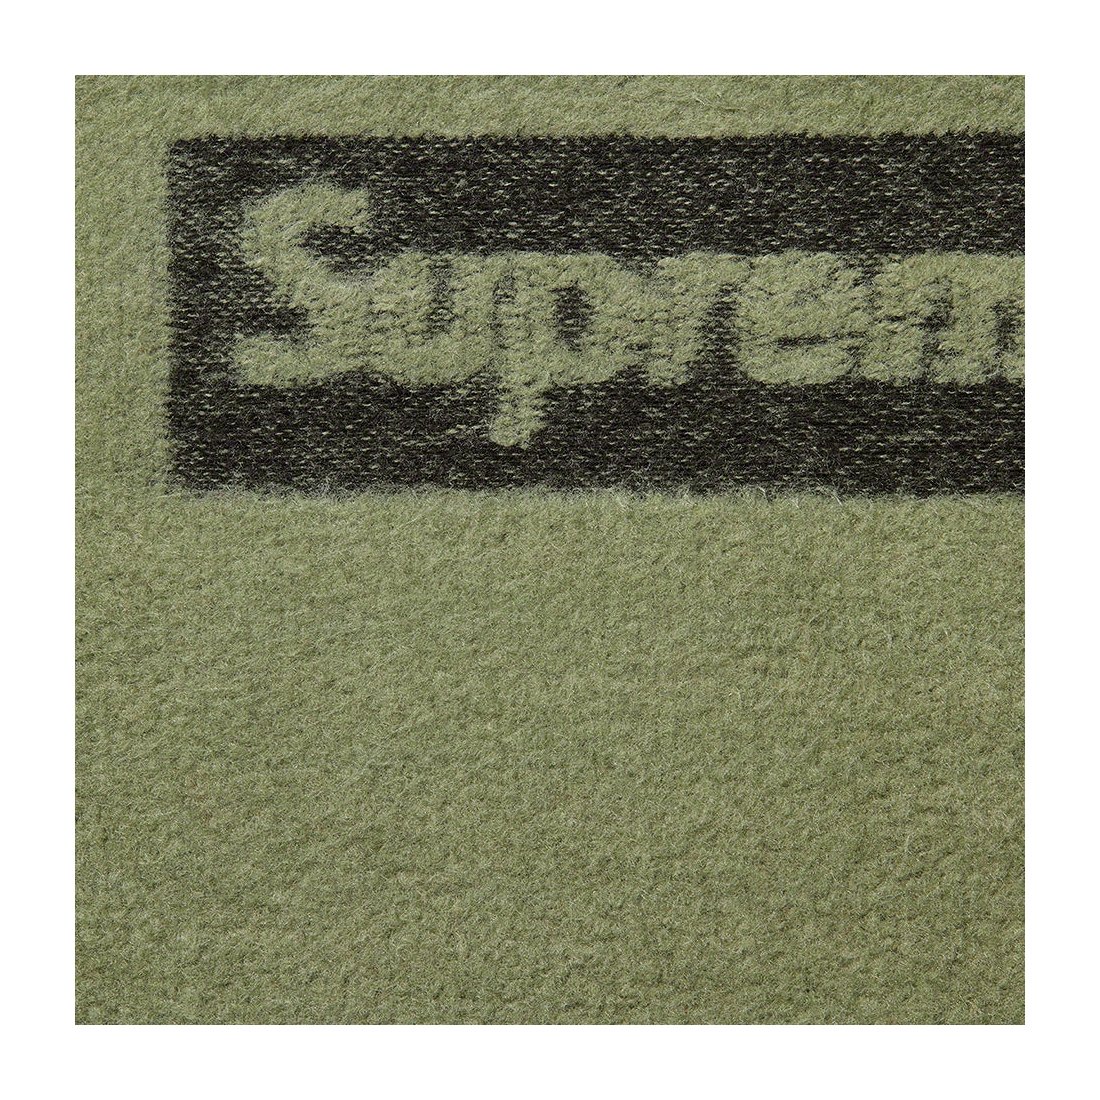 Details on Inside Out Box Logo Hooded Sweatshirt Light Olive from spring summer
                                                    2023 (Price is $168)